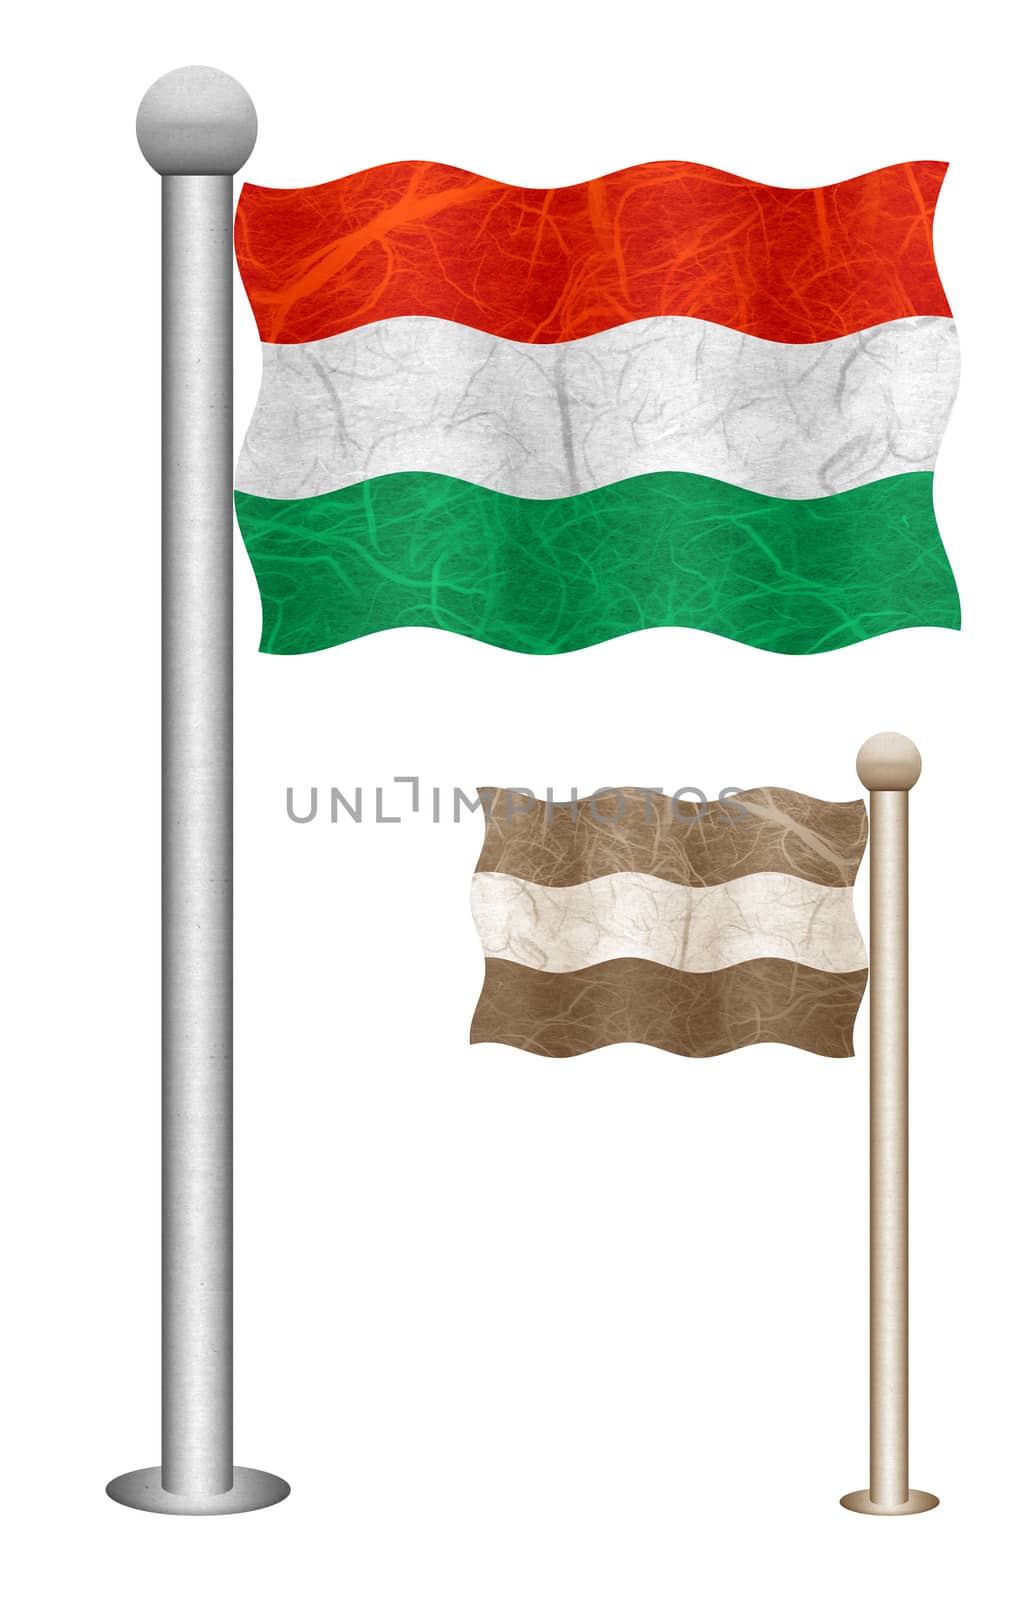 Hungary flag waving on the wind. Flags of countries in Europe. Mulberry paper on white background.